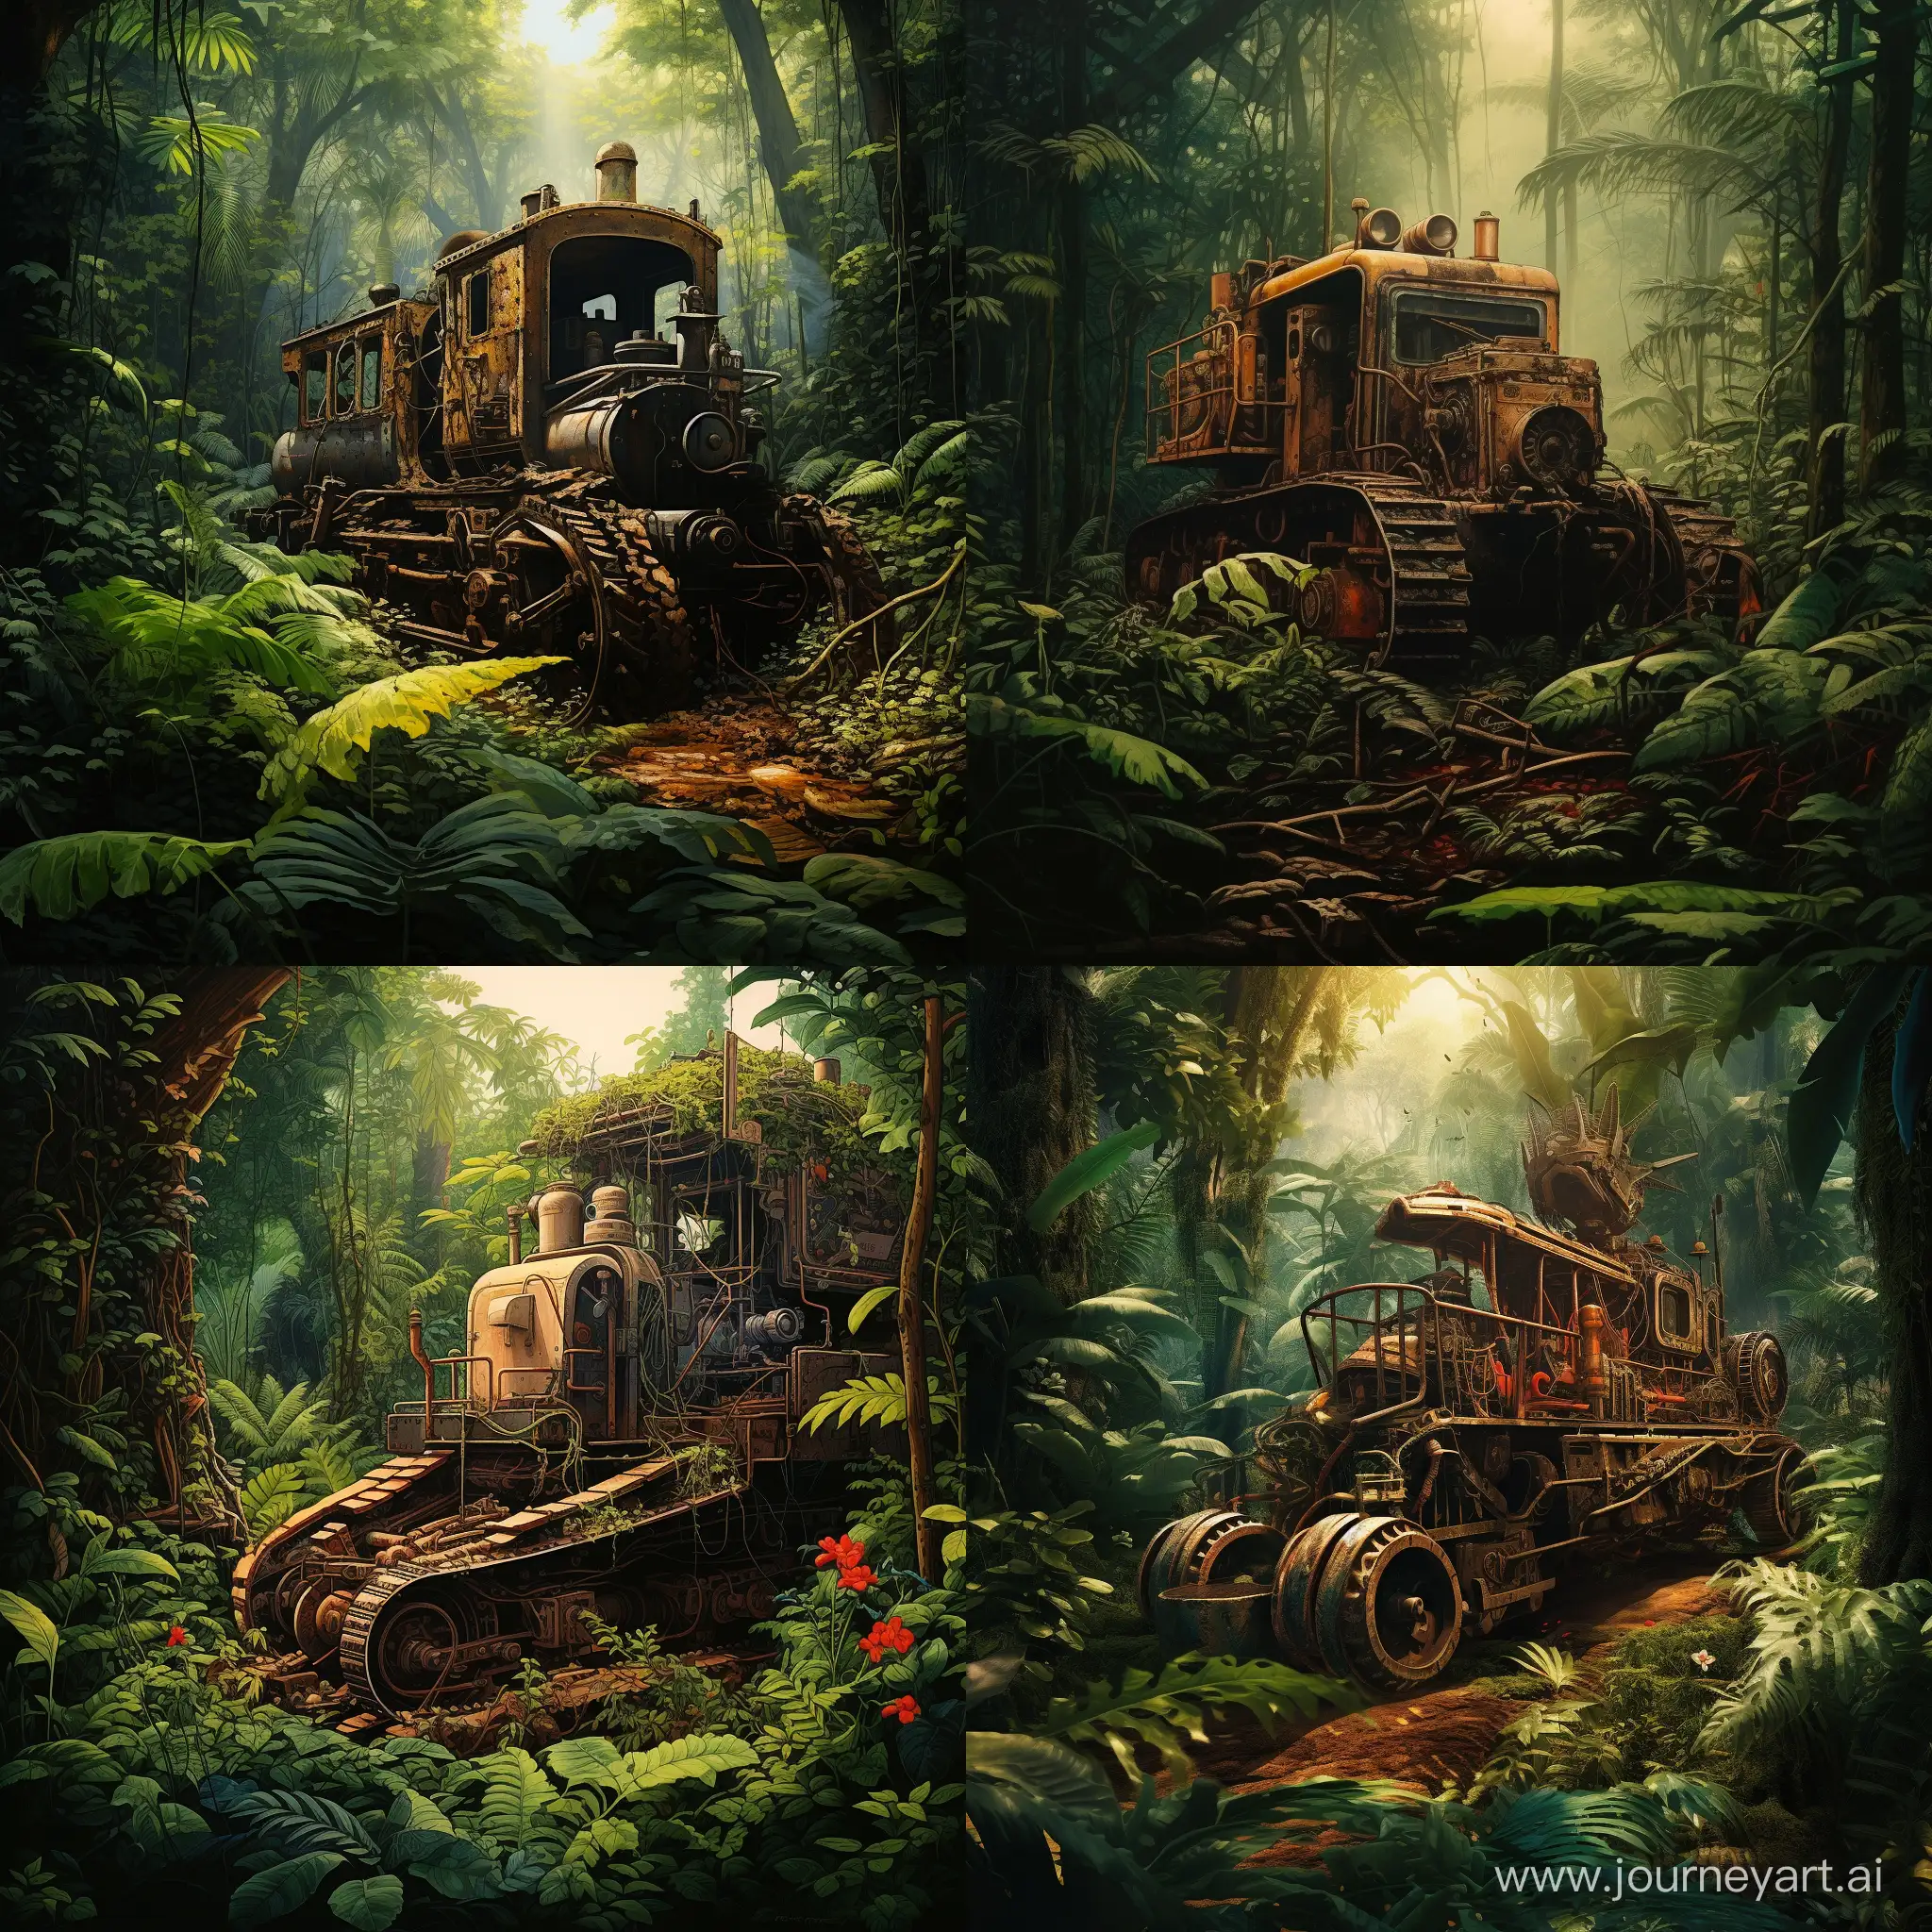 Tractor-Struggling-in-Vines-Locomotive-Pulling-in-Tropical-Forest